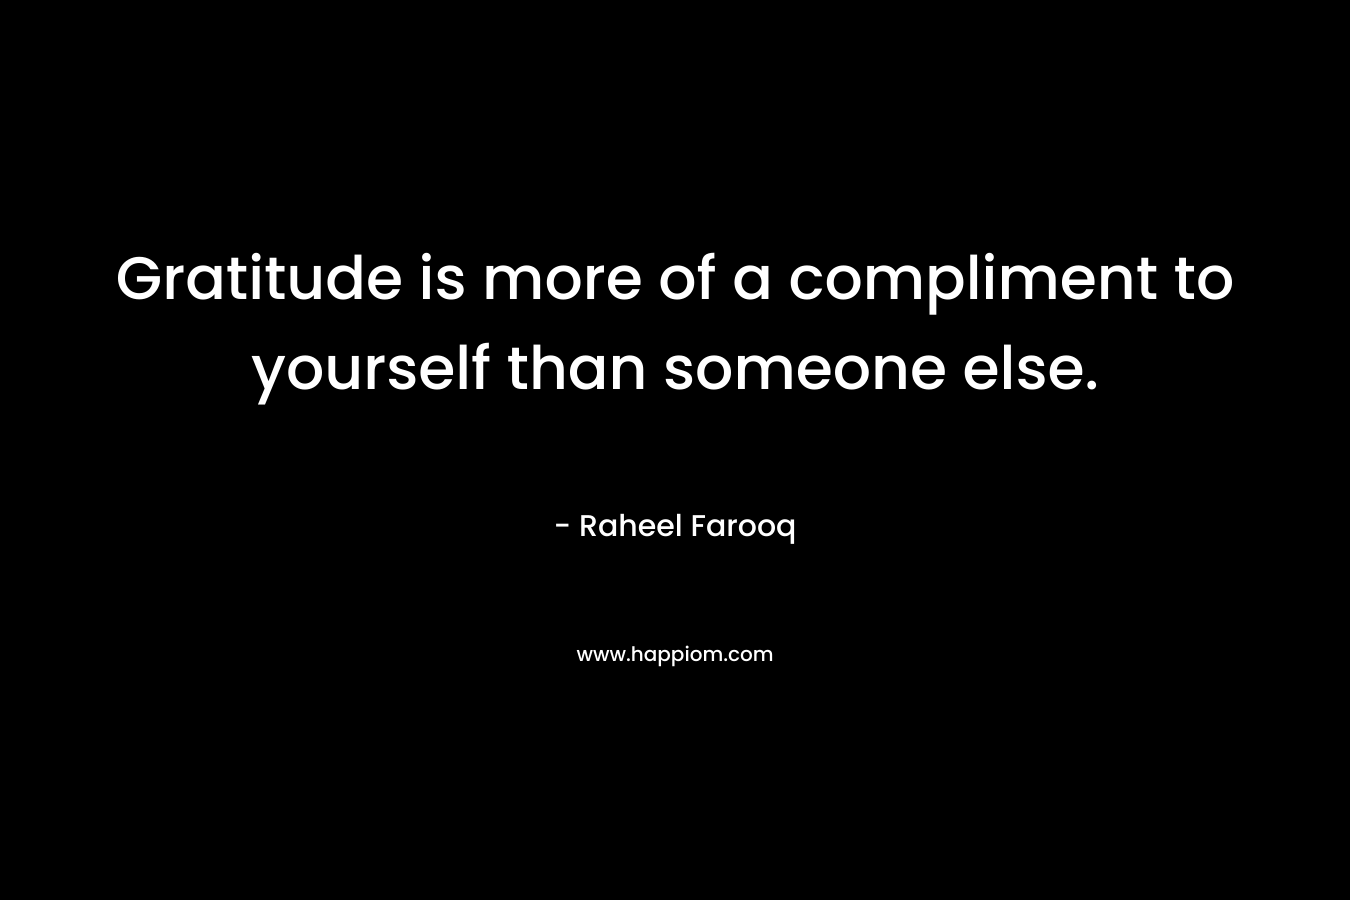 Gratitude is more of a compliment to yourself than someone else.